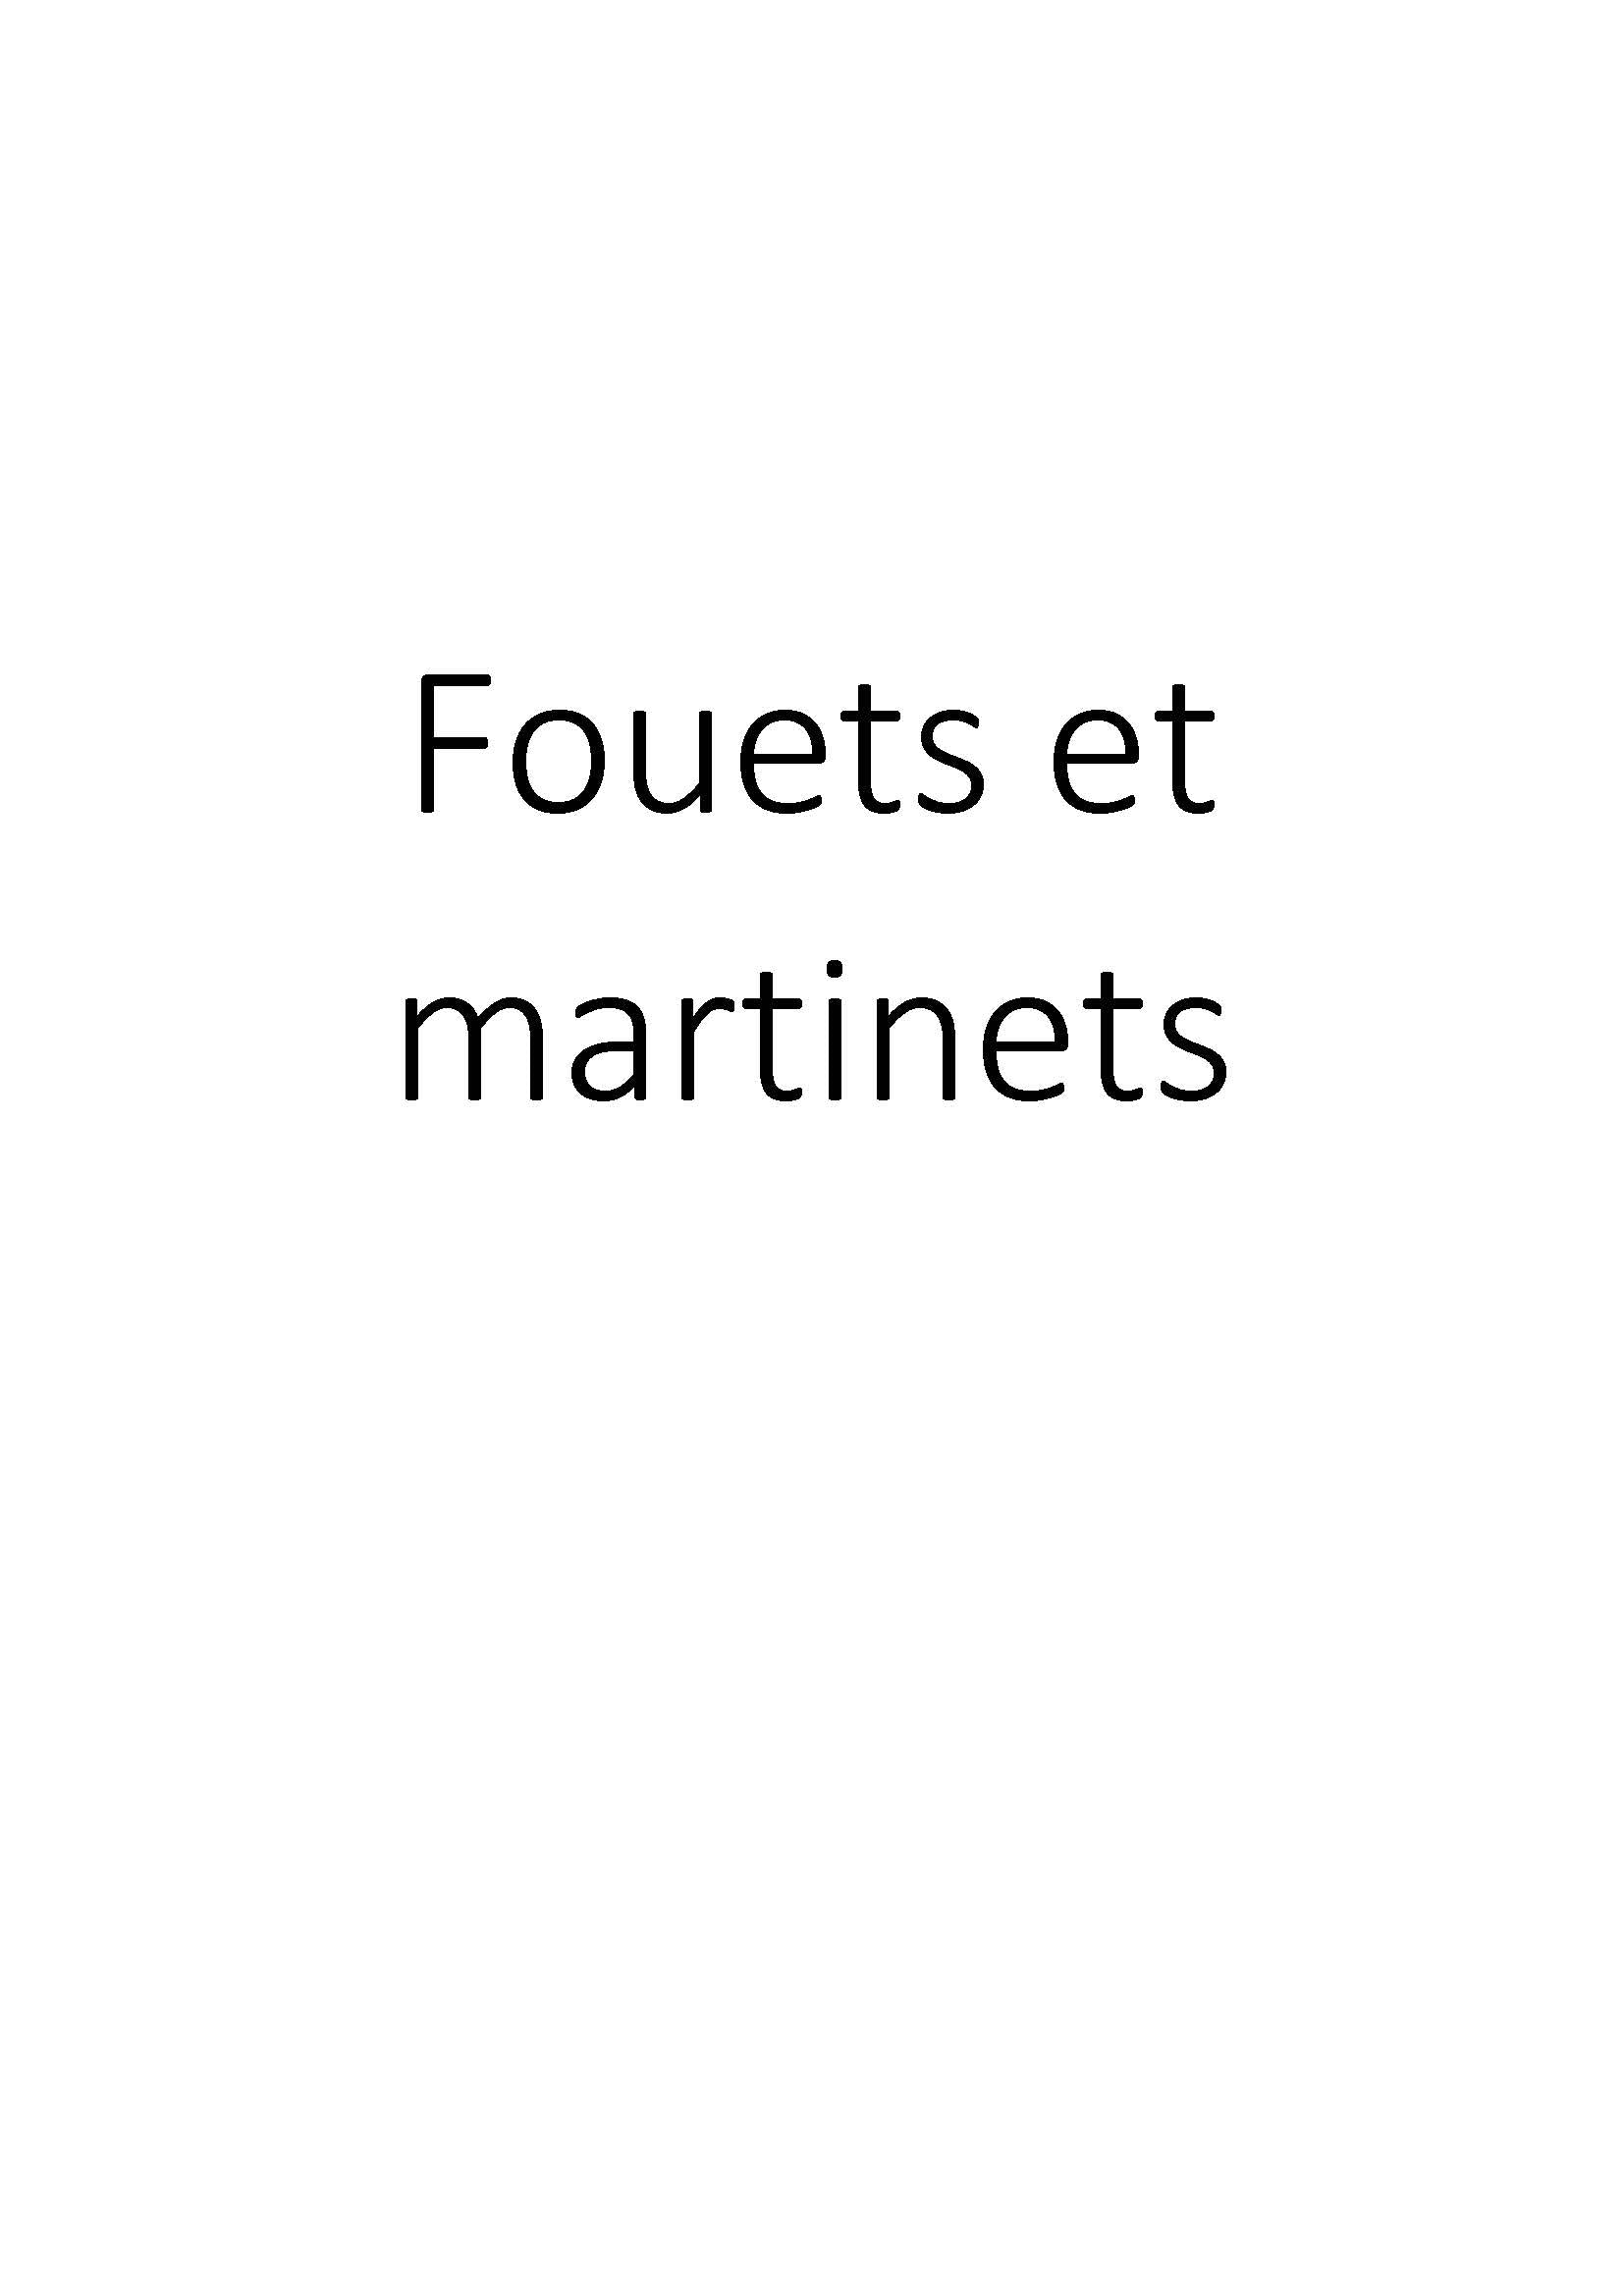 Fouets et martinets